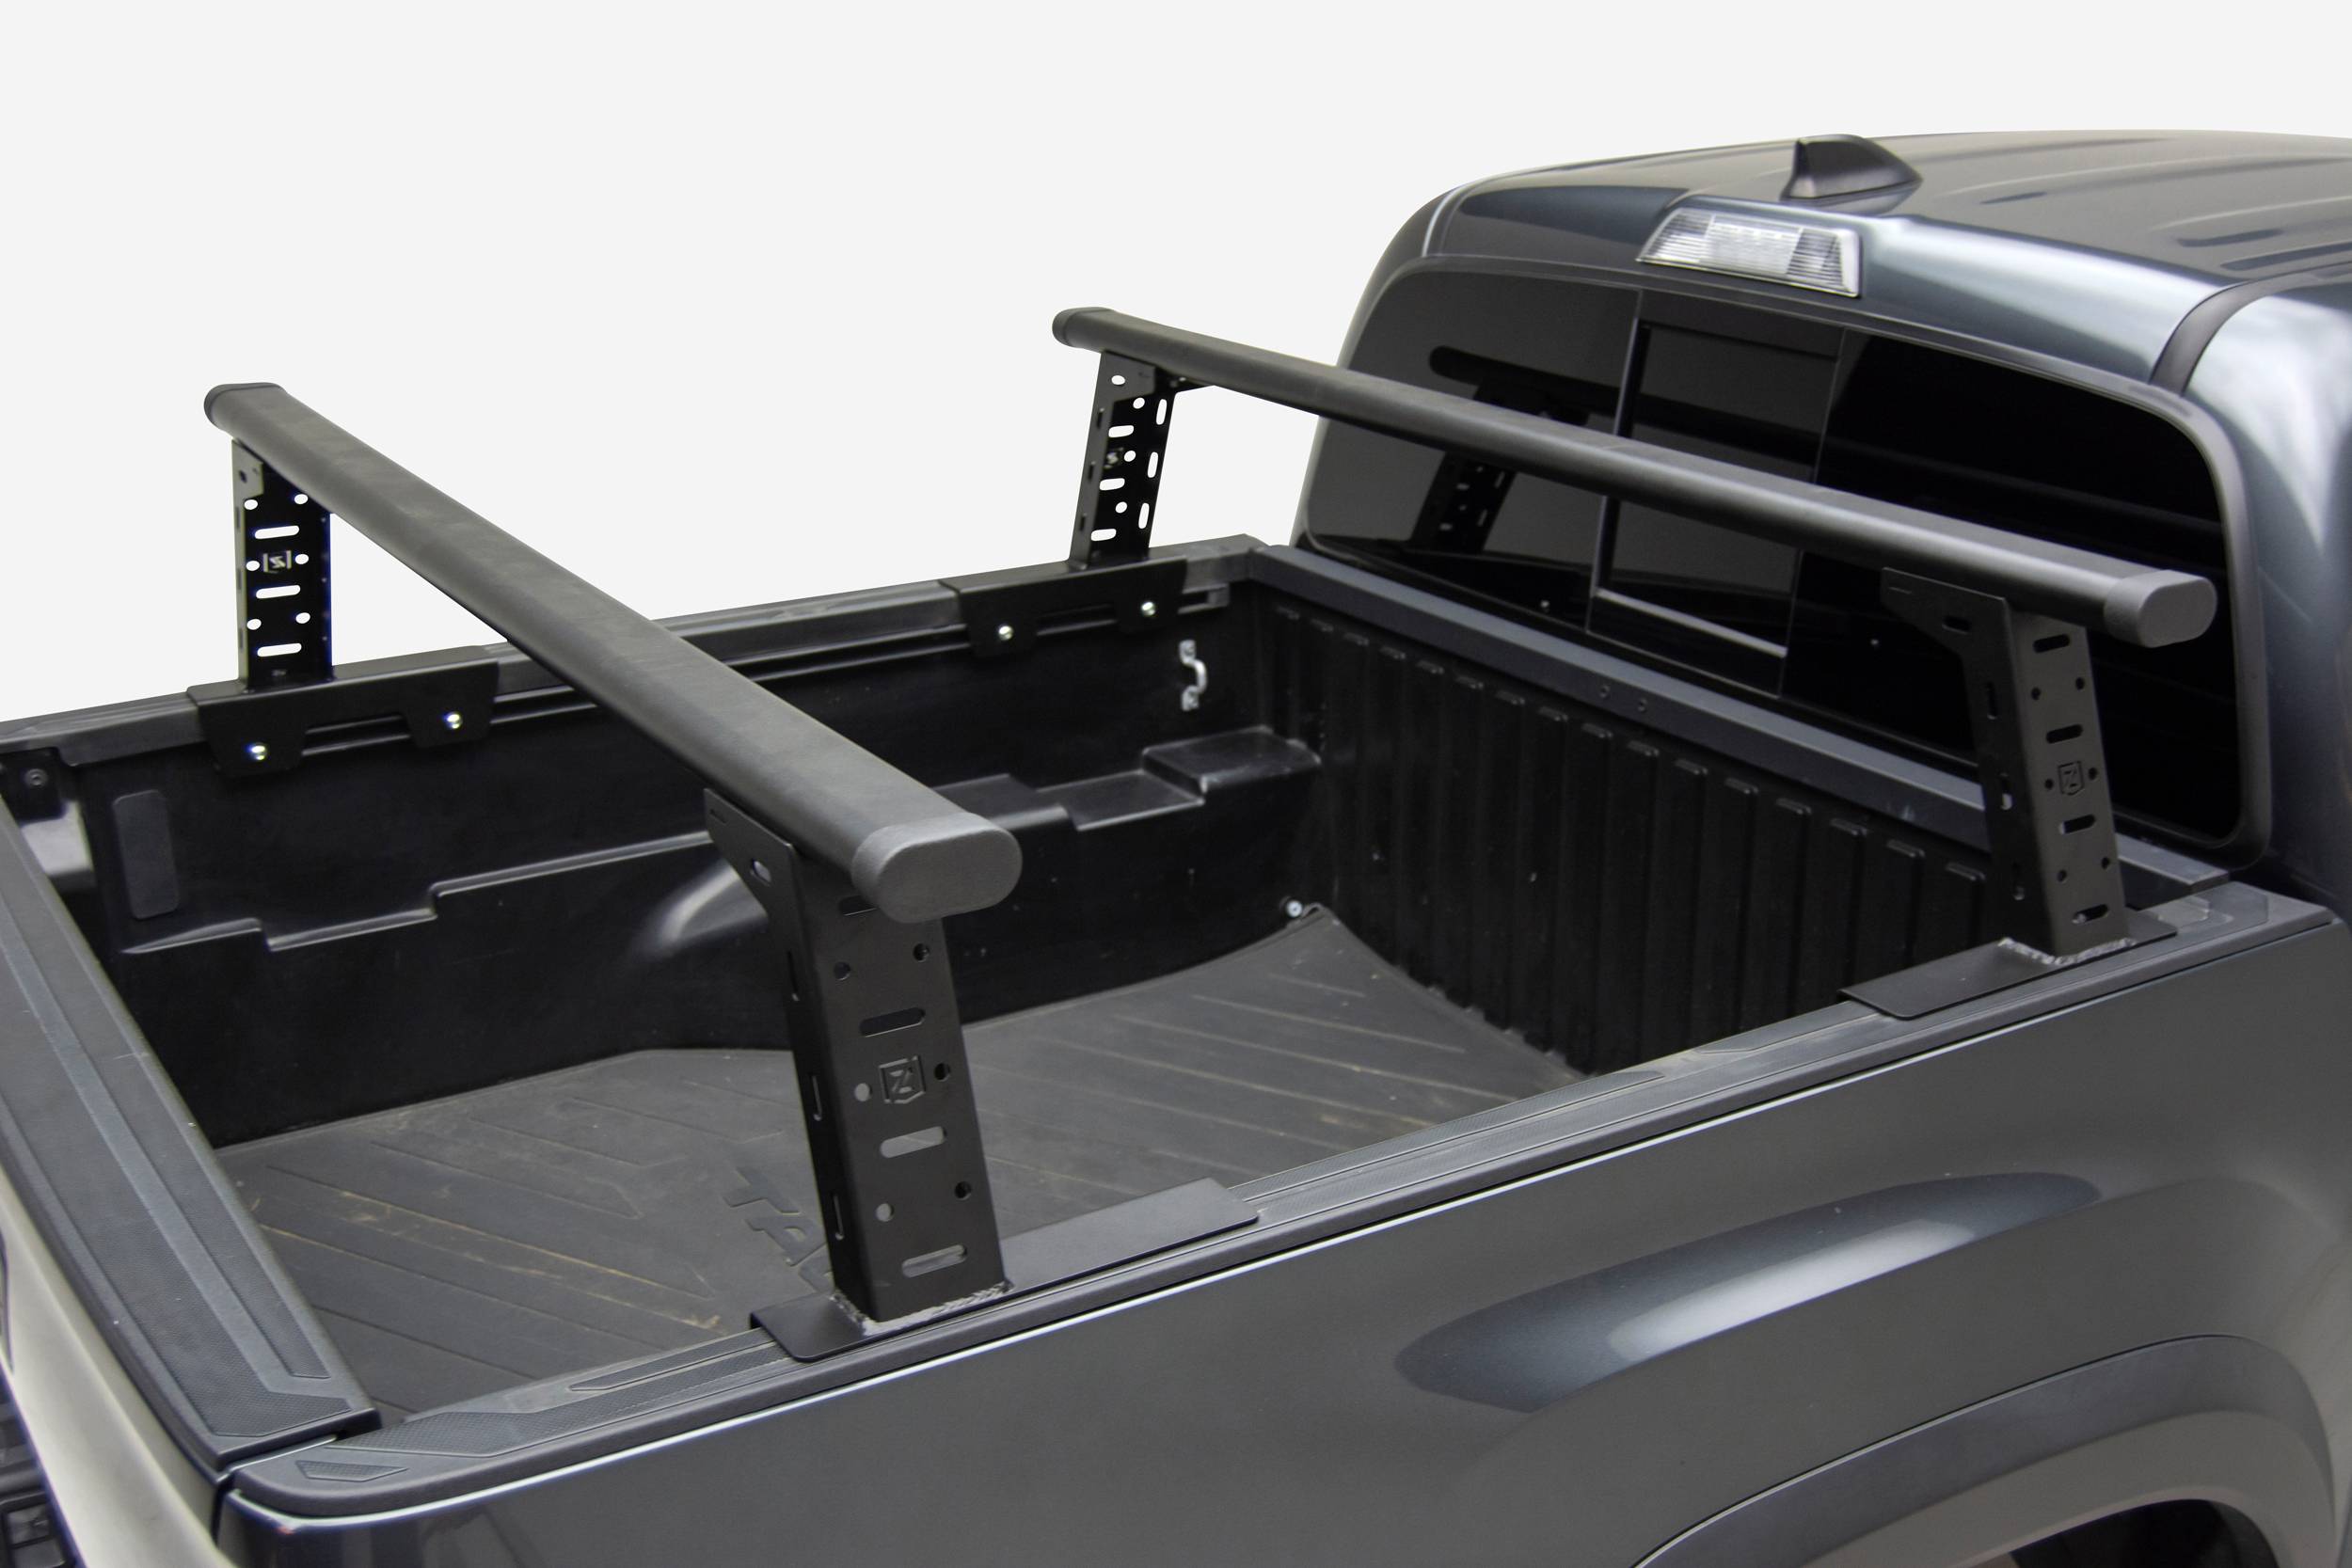 ZROADZ OFF ROAD PRODUCTS - 2005-2023 Toyota Tacoma Mid-Height Overland Rack – PN # Z879100